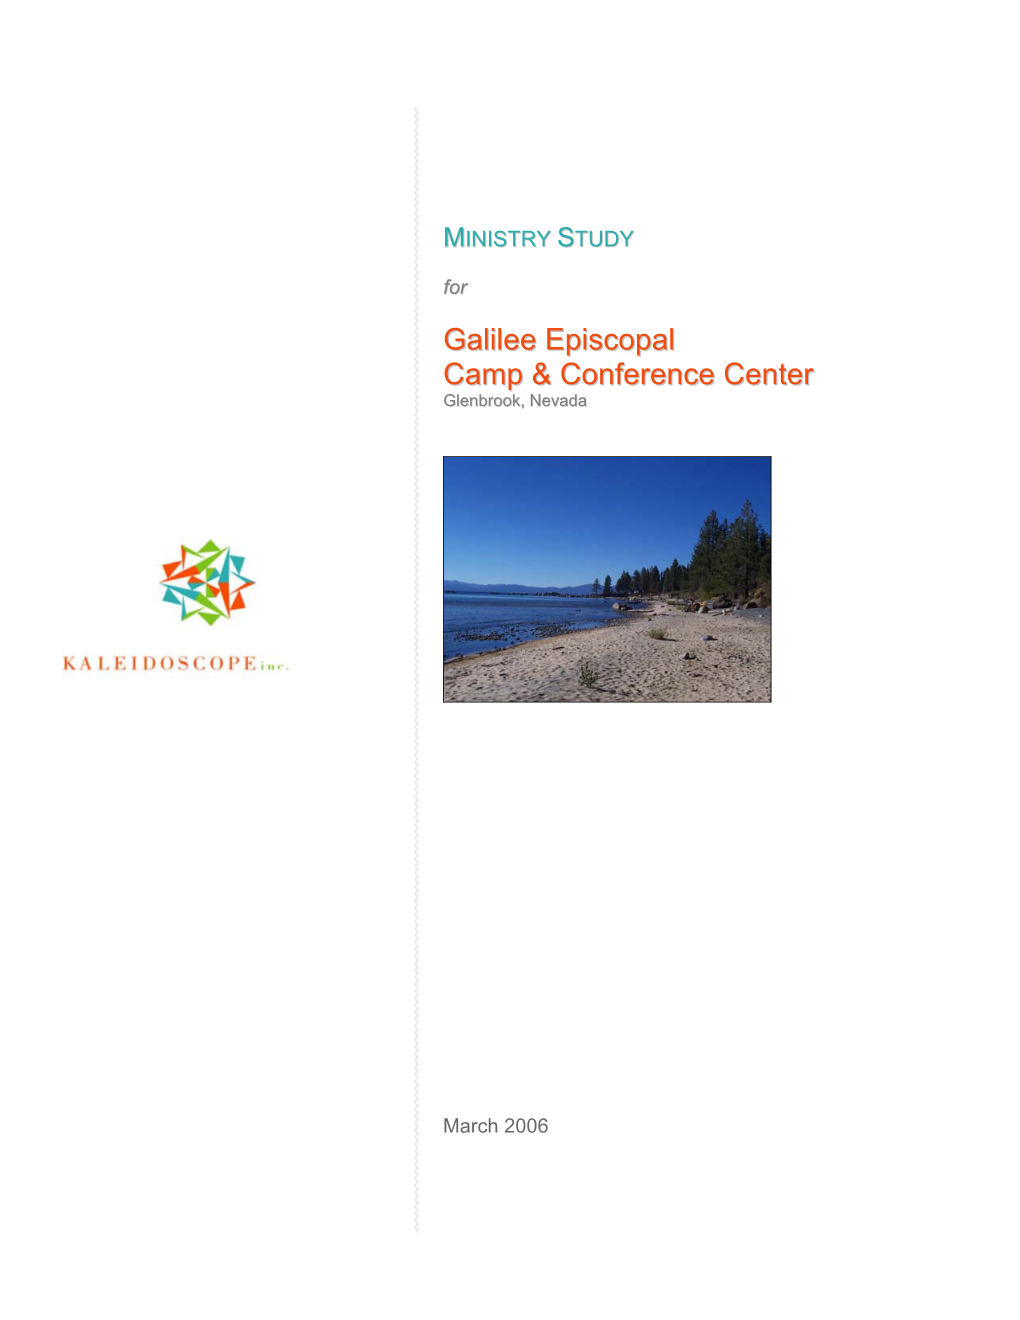 Galilee Episcopal Camp & Conference Center